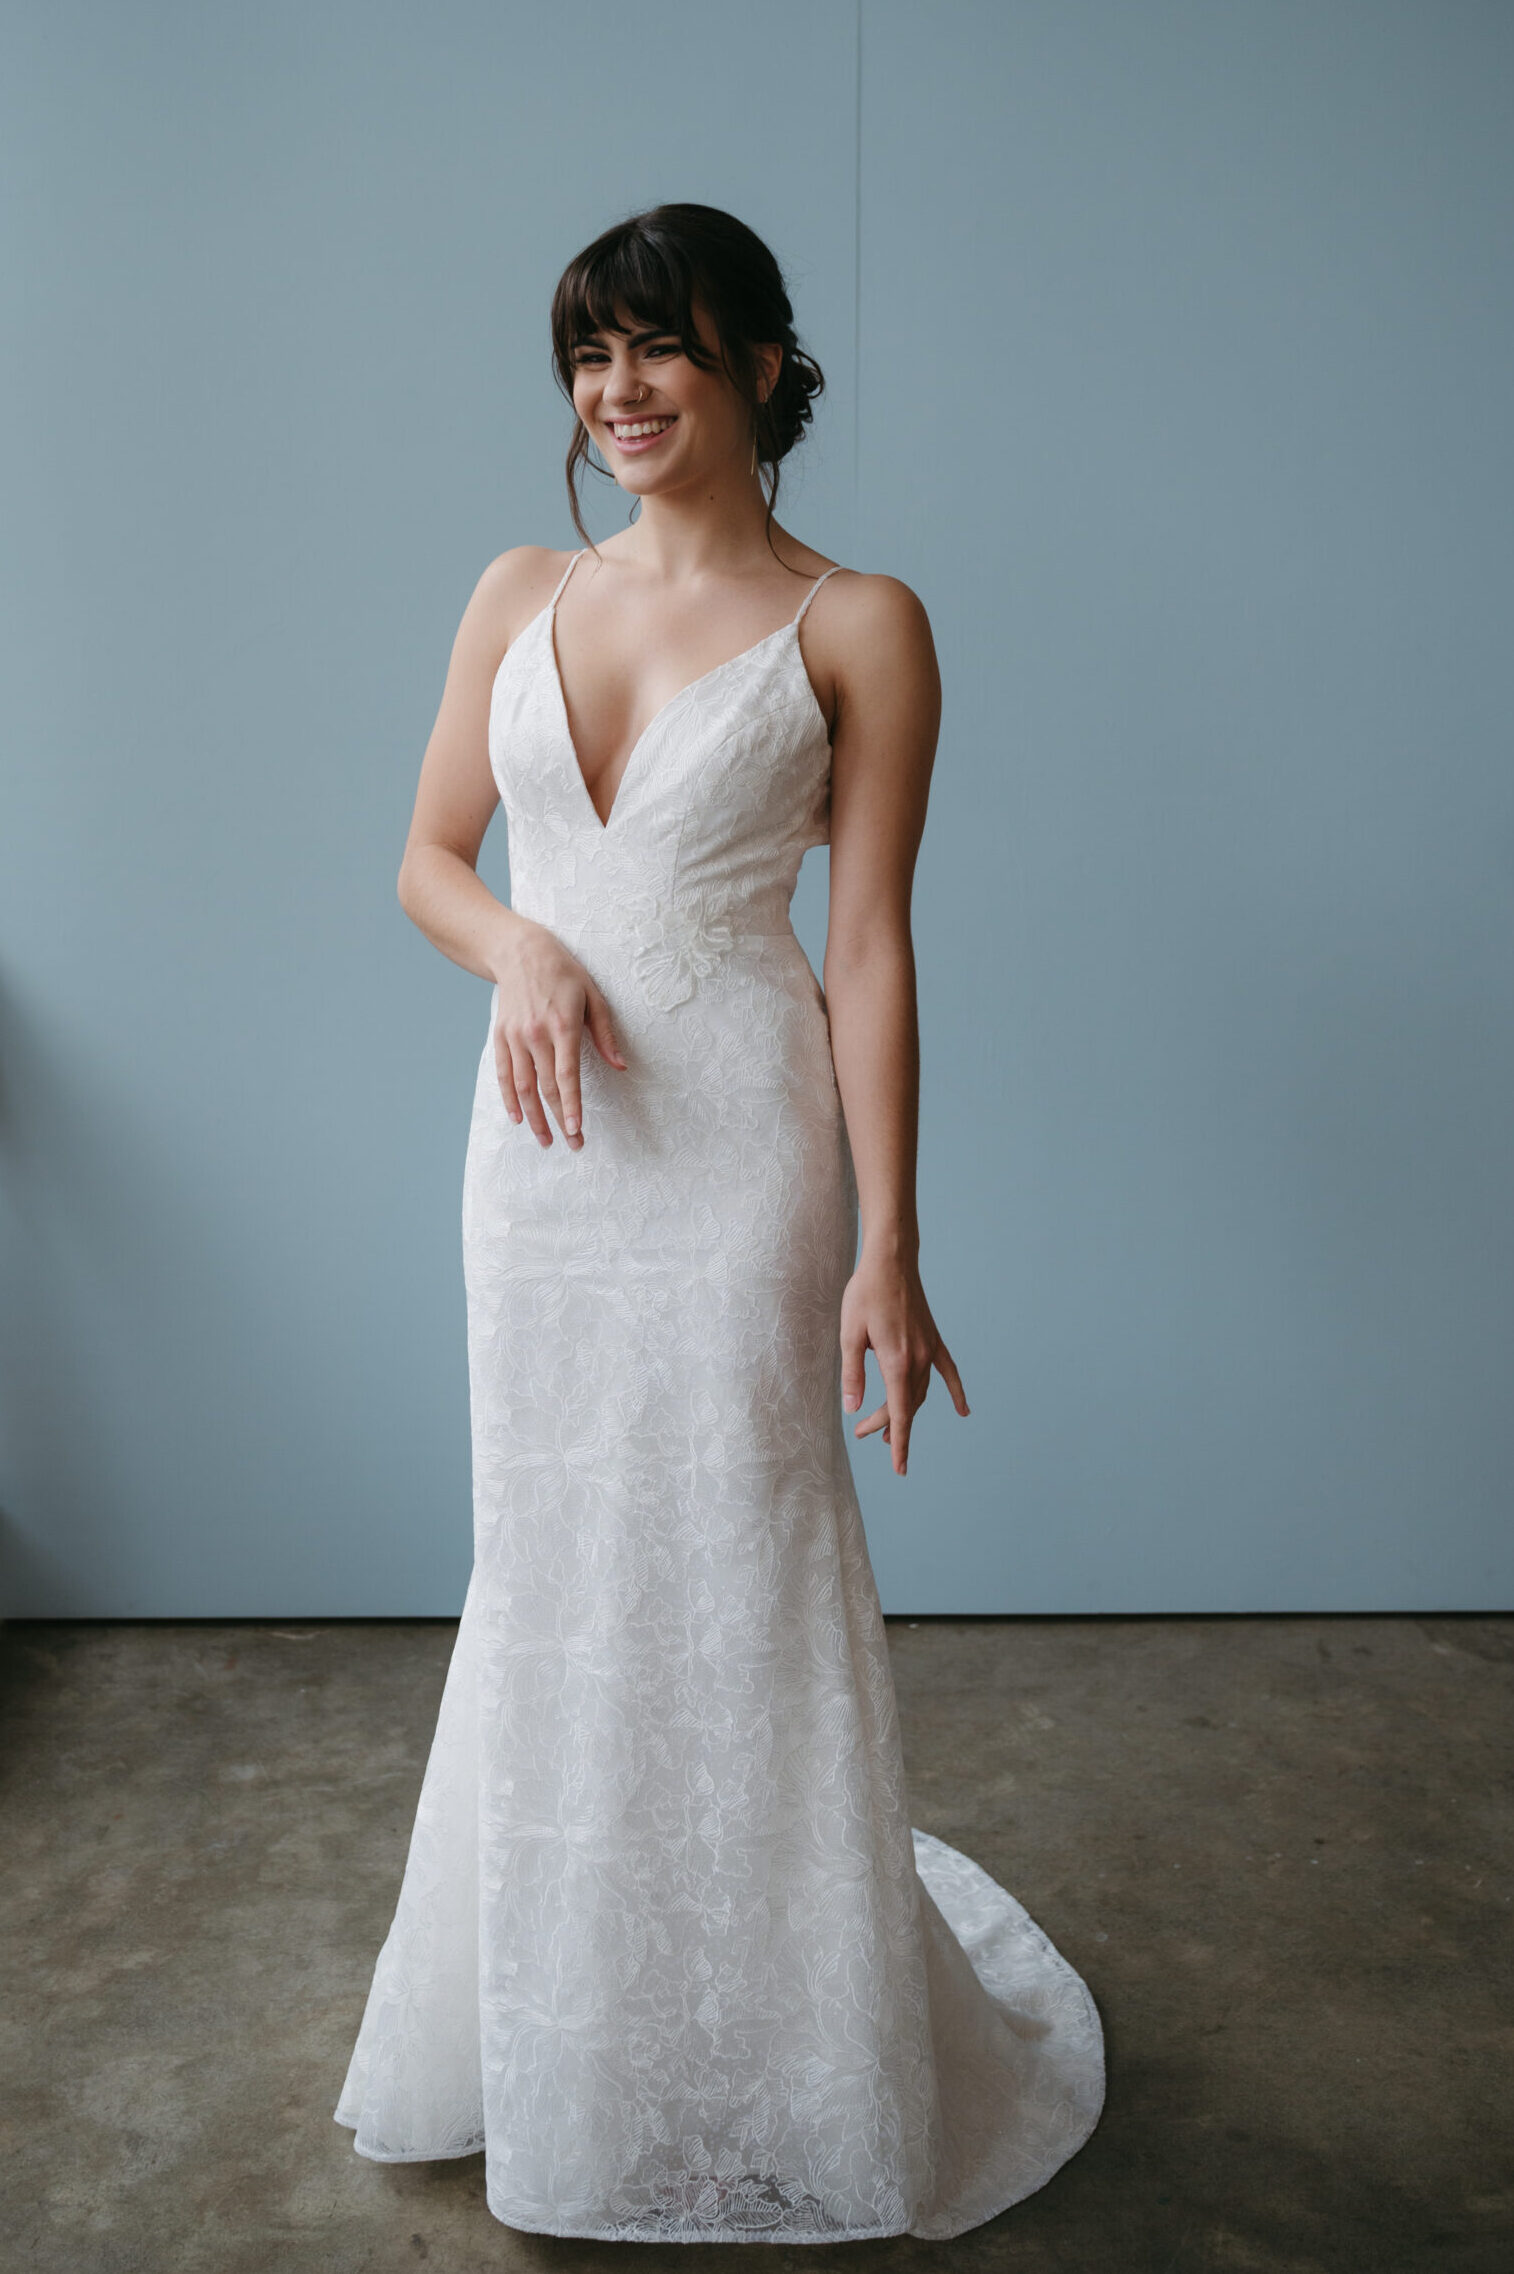 Exquisite Custom Made Wedding Dresses by The House of Couture - The House  of Couture - Medium